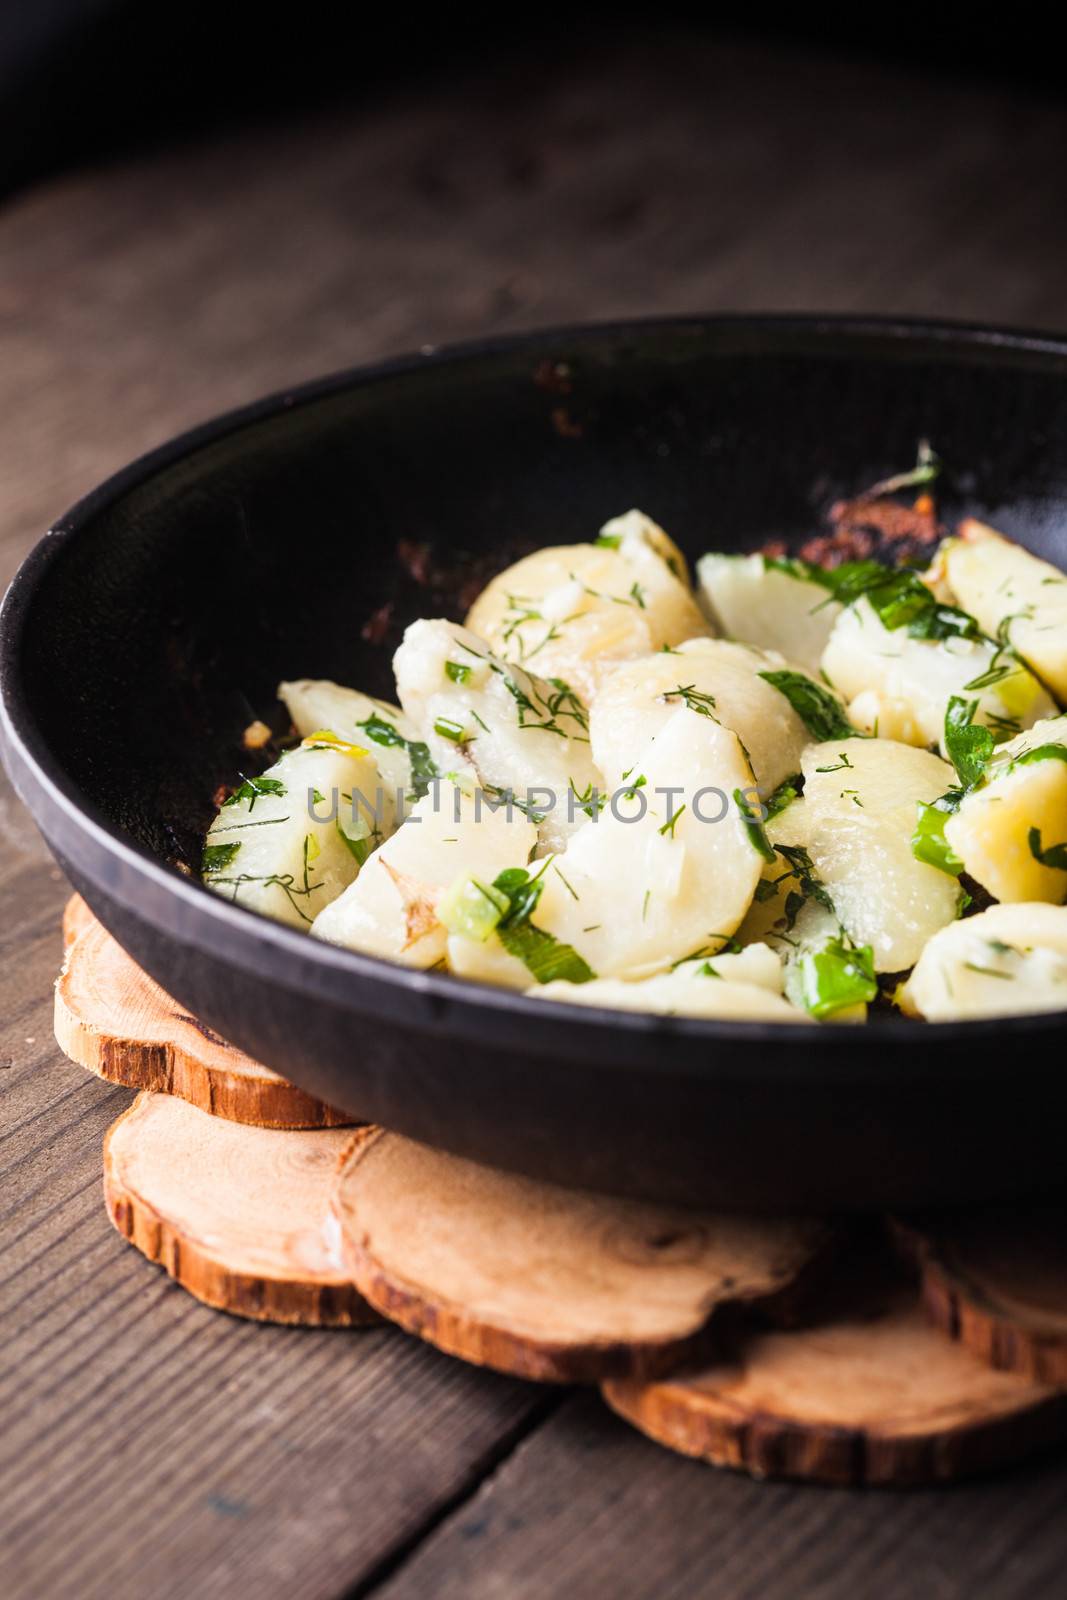 Rustic baked potato with herbs in frying pan